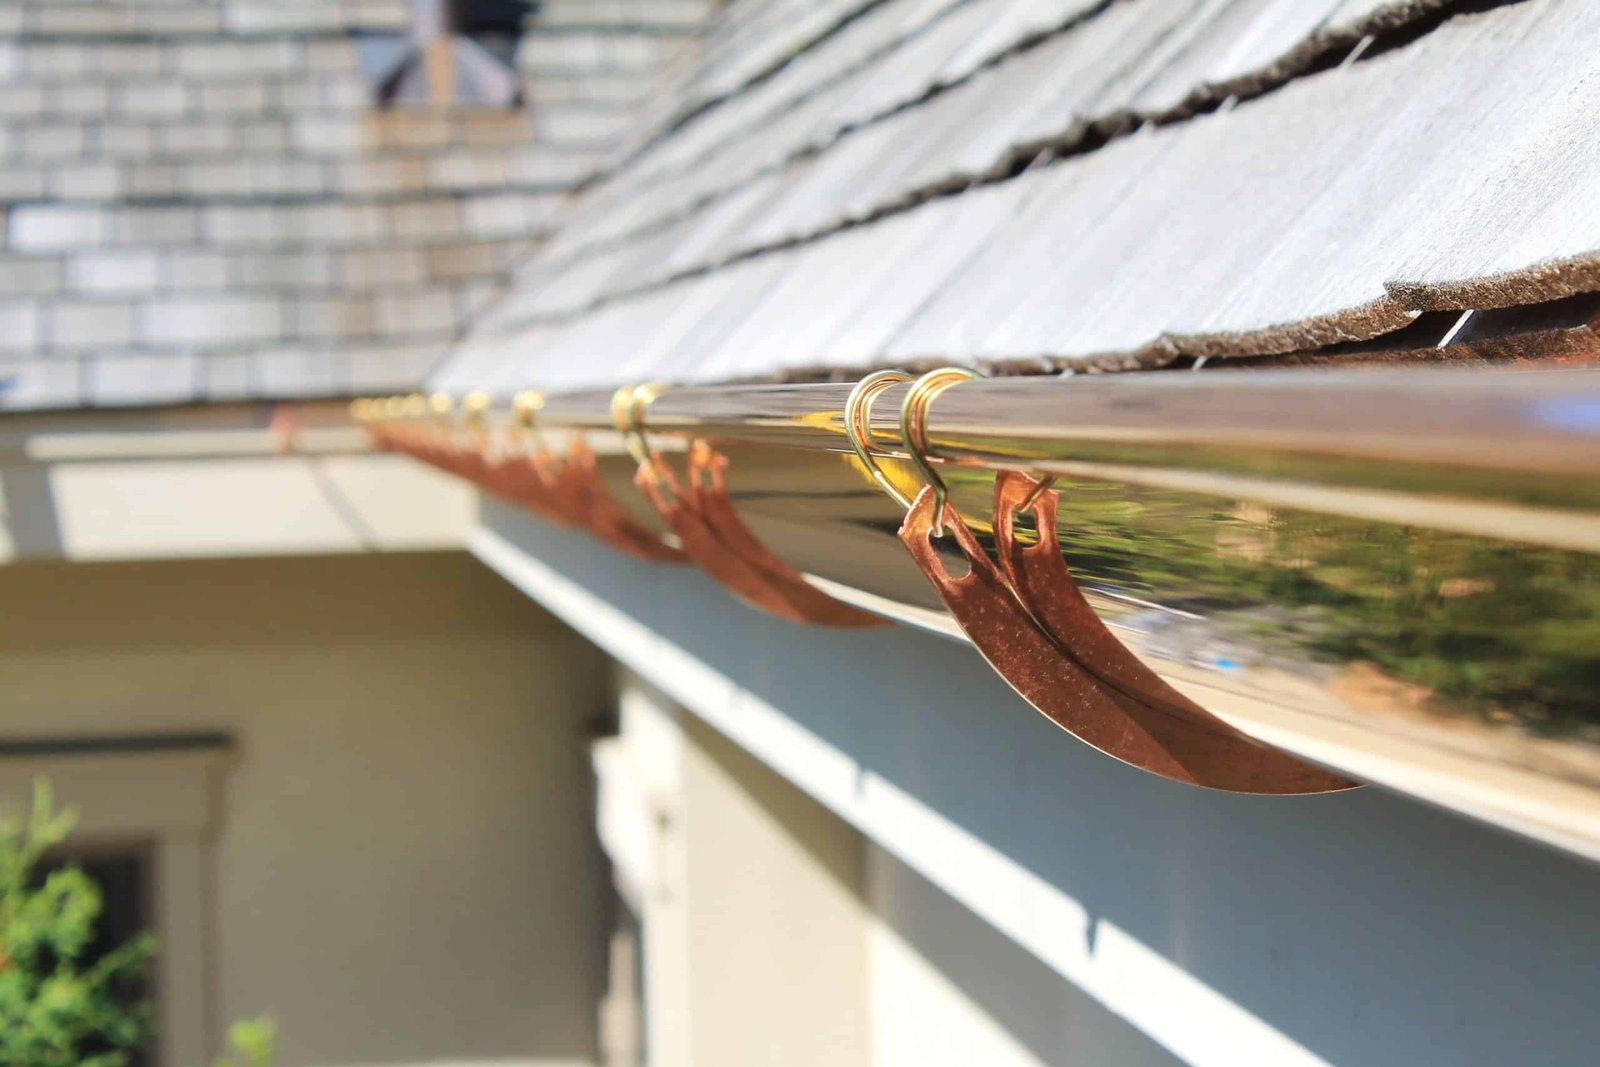 Why you need gutters Types of gutters Common Gutter Problems Choosing a Gutter System Leaf Protection Systems Gutter Accessories Gutter Installation Gutter Maintenance Gutters and Rainwater Harvesting Formation of icicles and ice dams